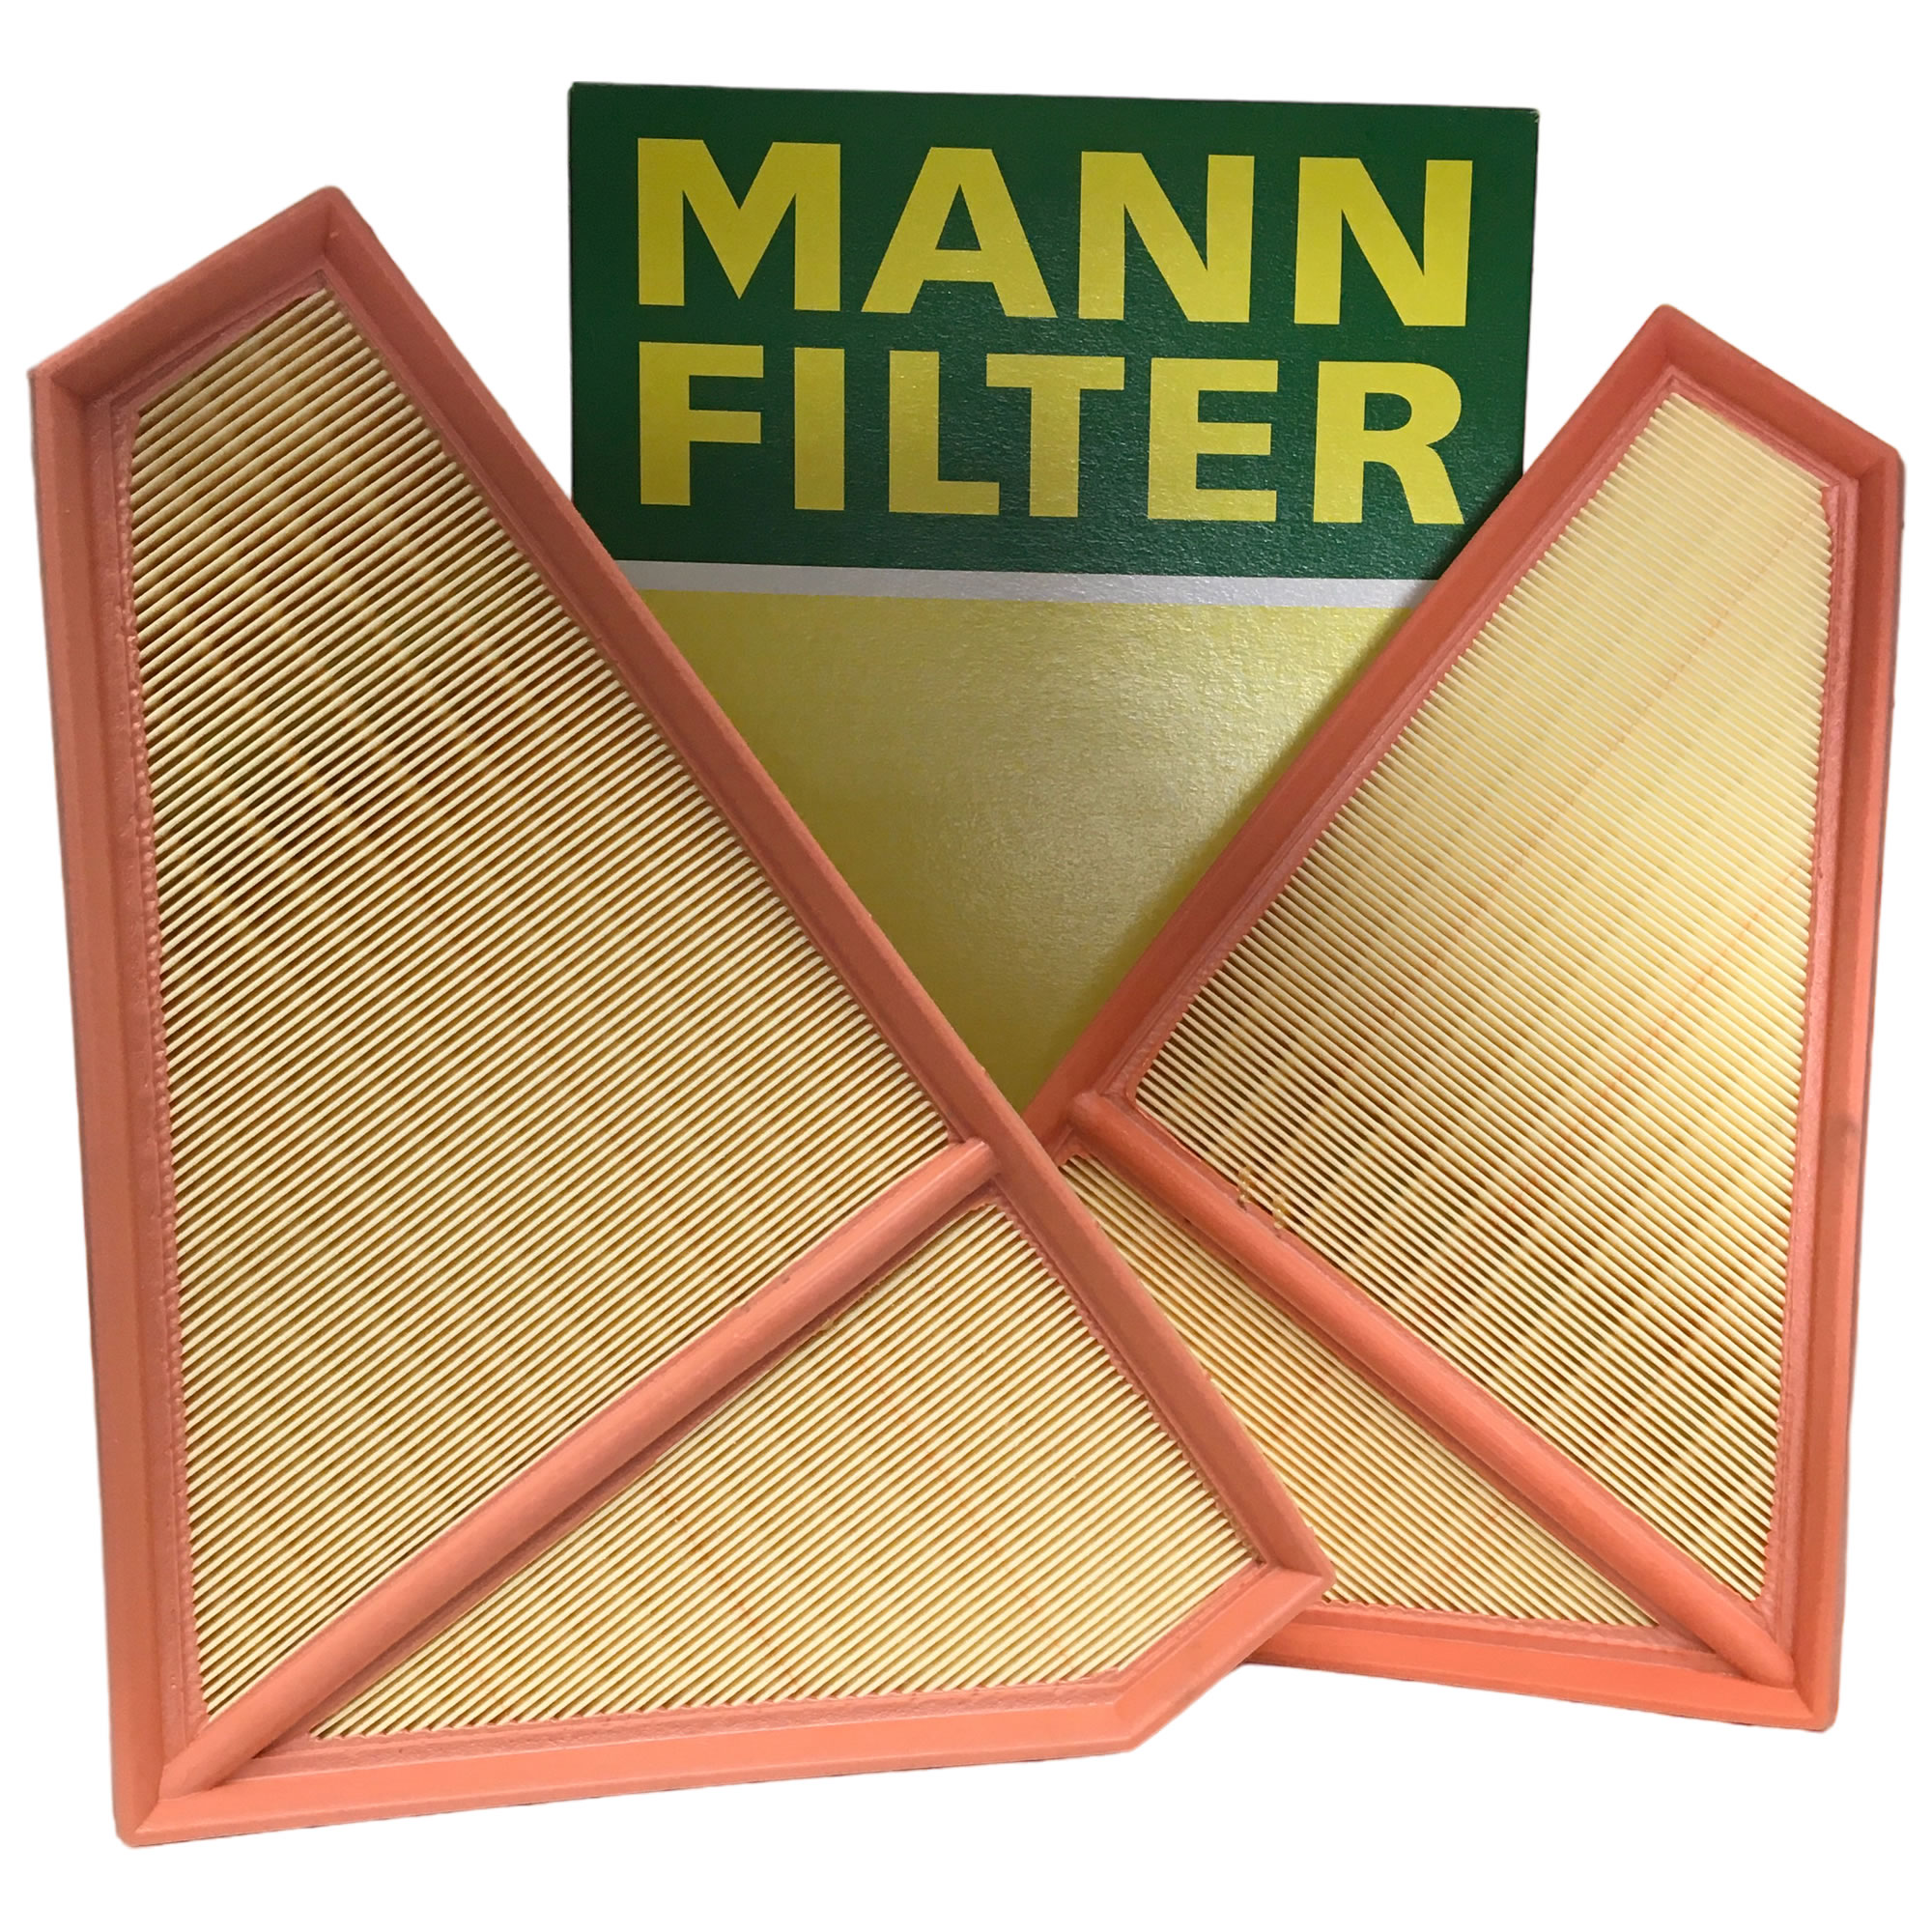 Two air filters for the Jaguar F-Type. C36008 and C36009